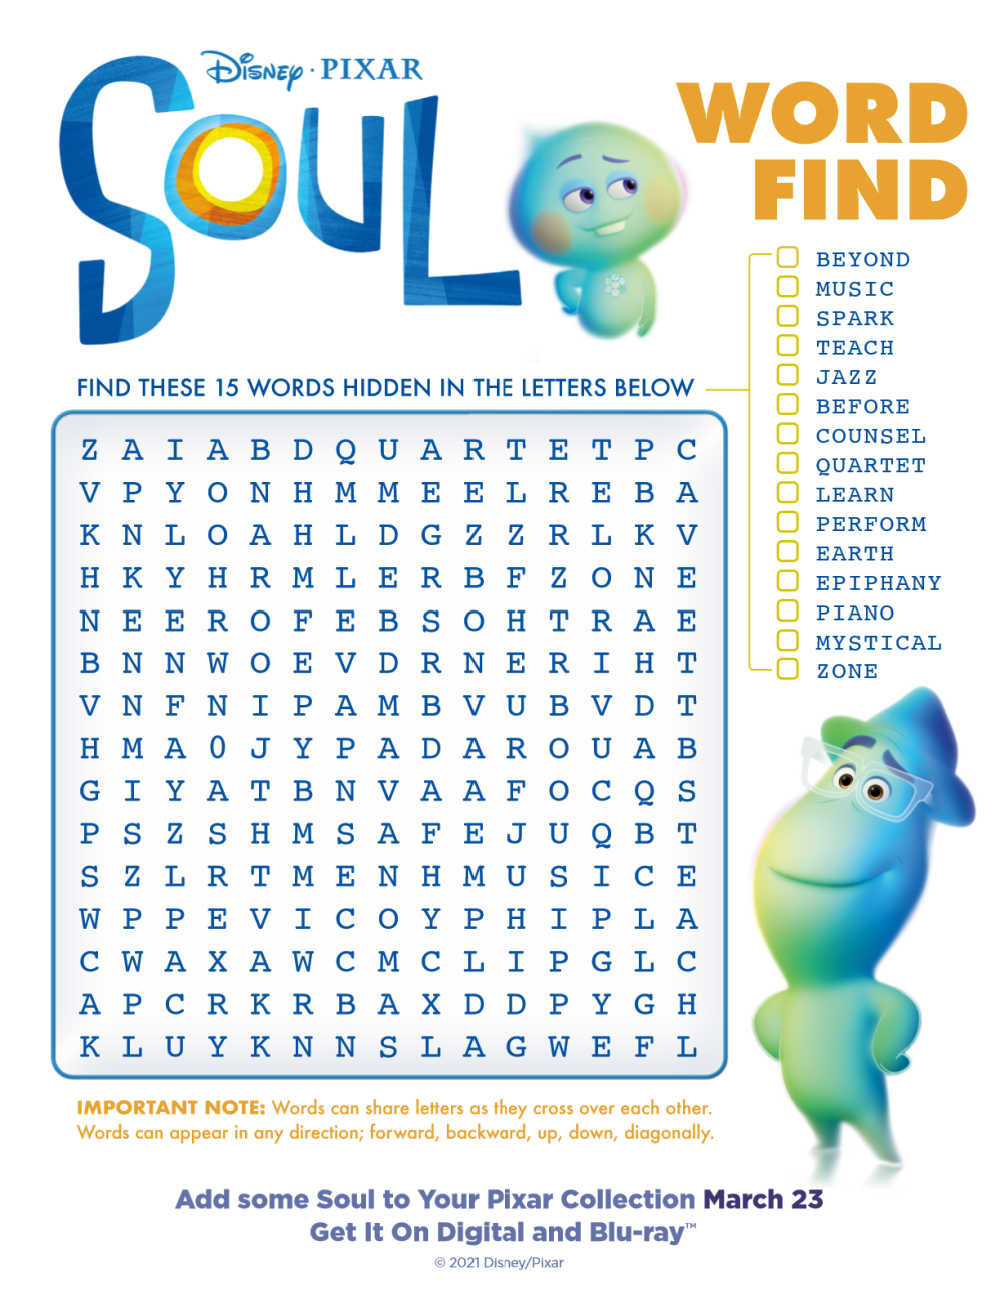 Enjoy a fun movie themed challenge, when you download this free Disney Pixar Soul word search activity page.